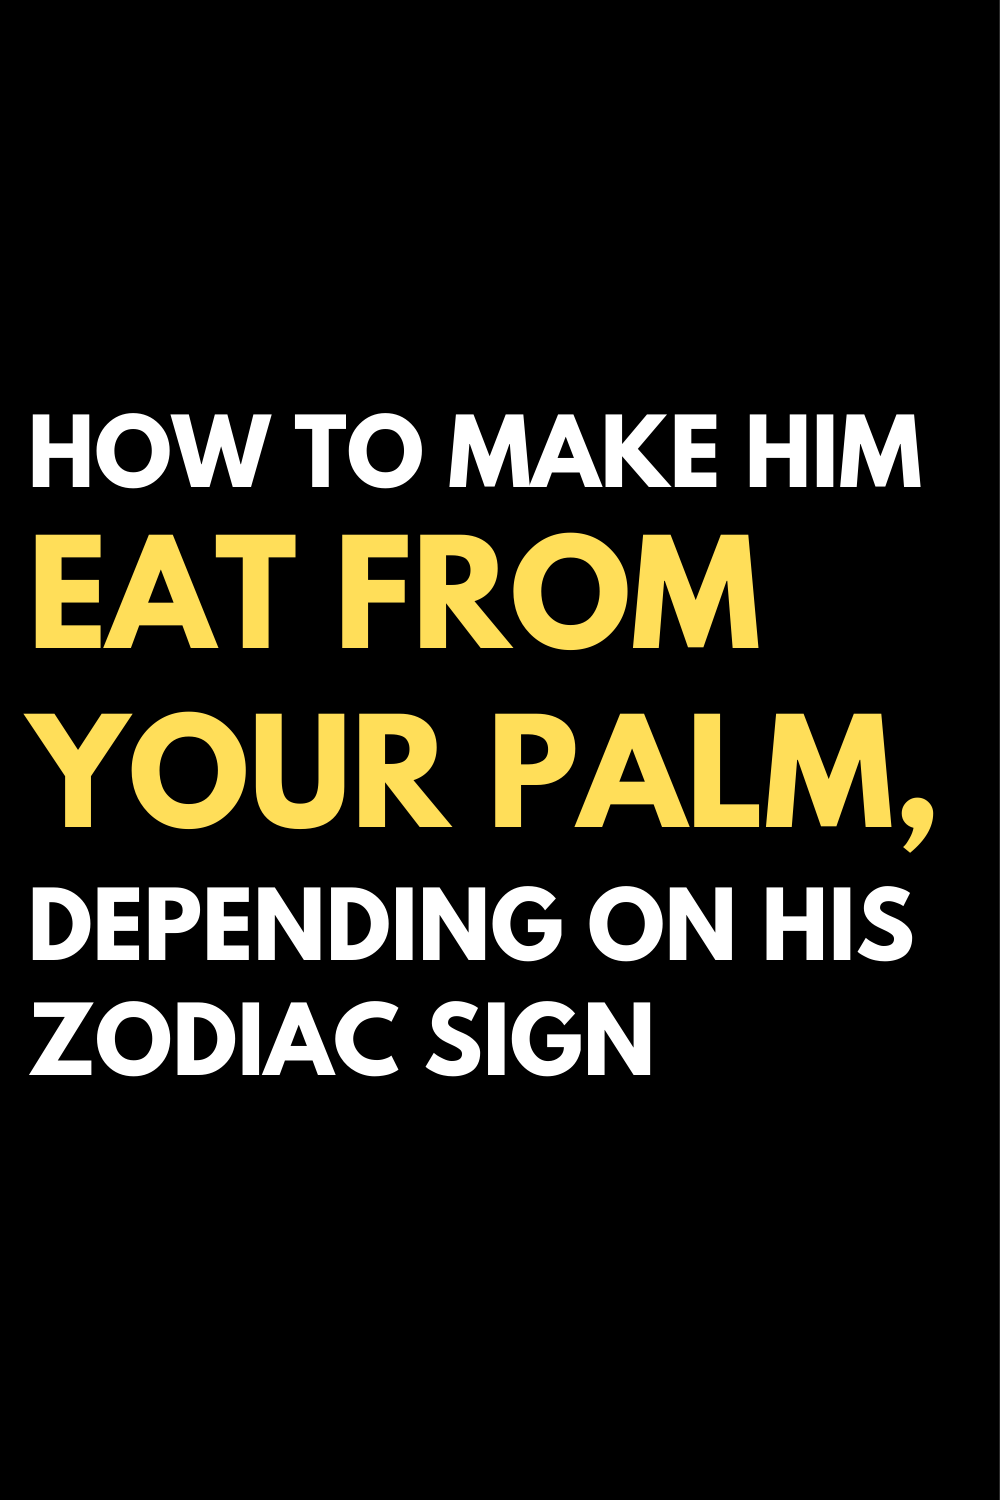 How to make him eat from your palm, depending on his zodiac sign